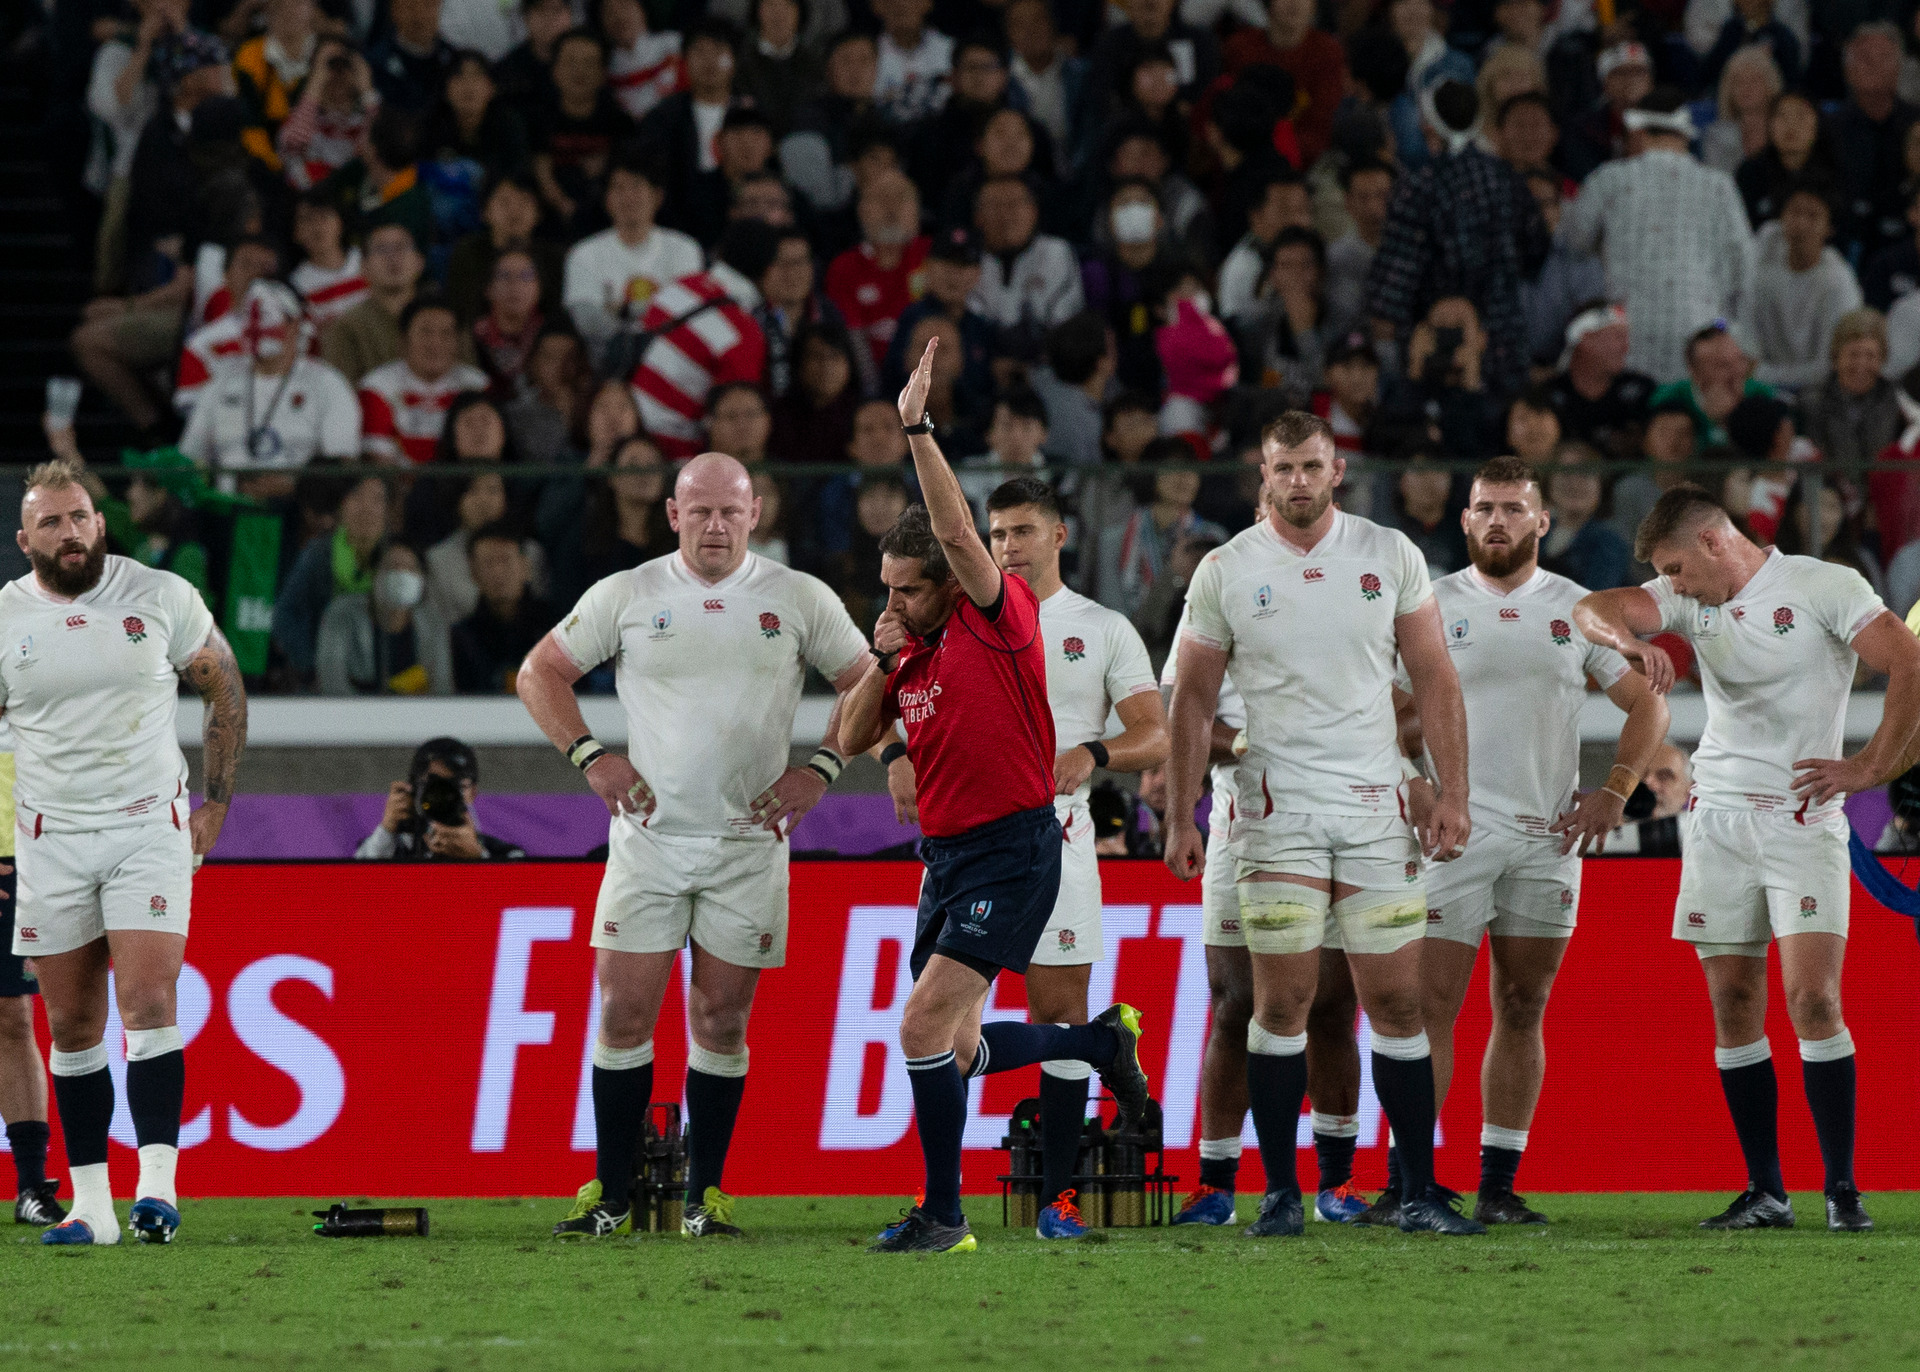 Rugby World Cup: South Africa surge to glory as England fall short